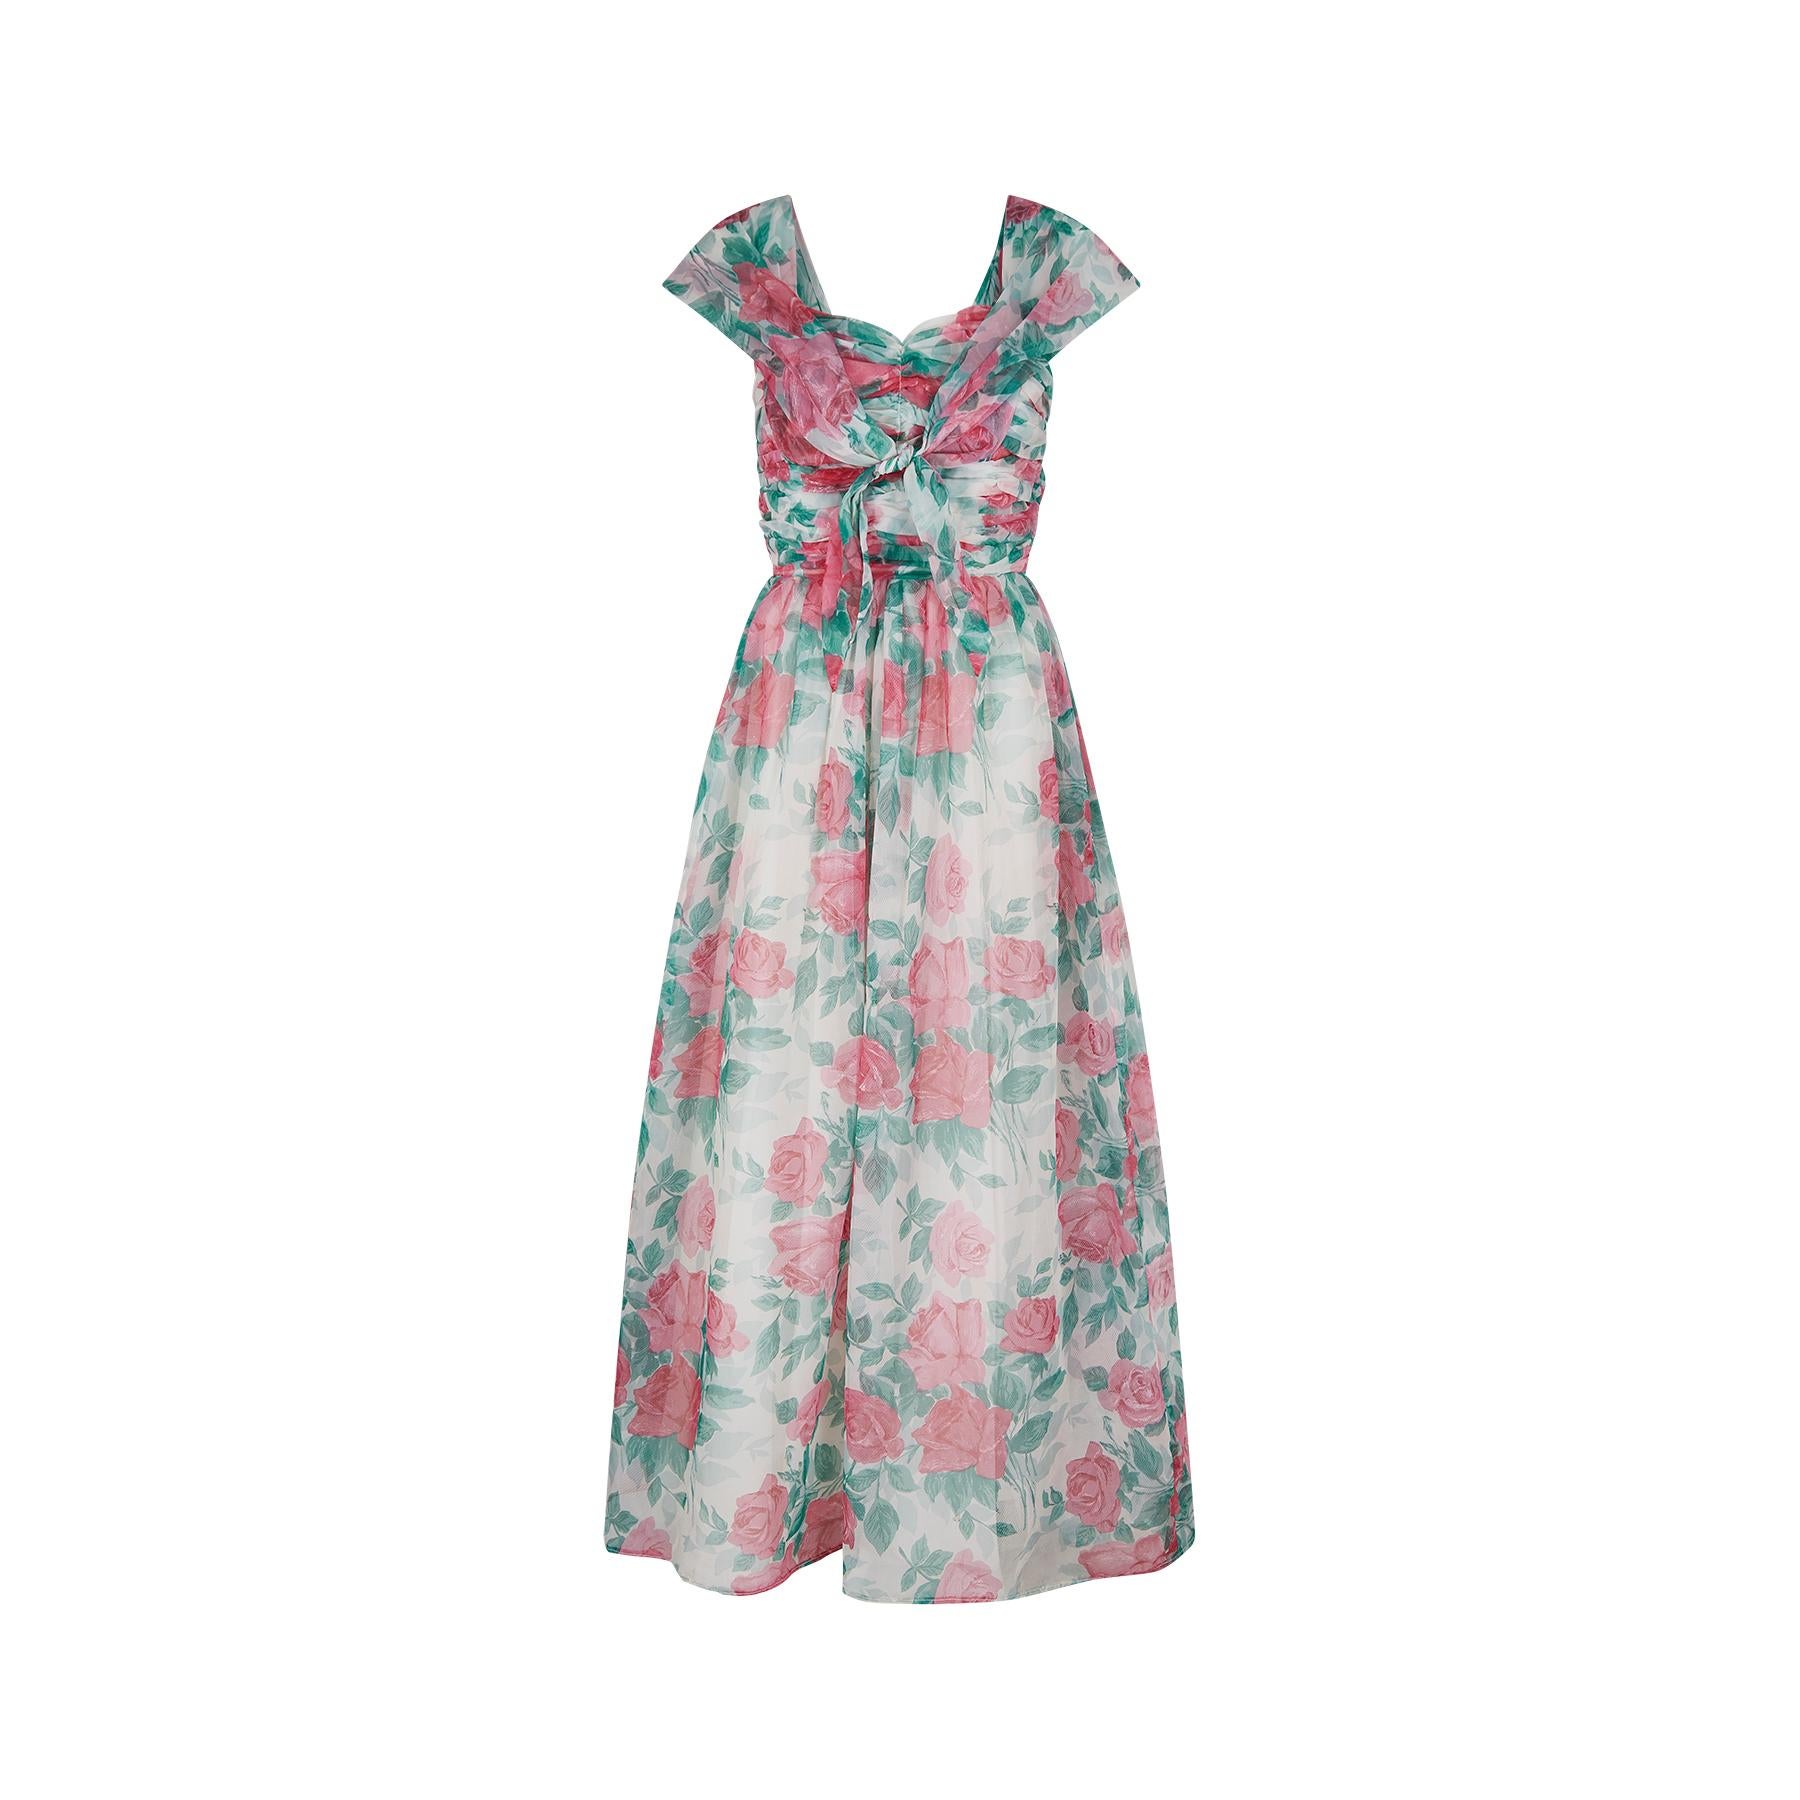 A very beautiful and romantic 1950s English rose print maxi dress. It has a ruched bodice with a sweetheart neckline which is gathered at the side seams.  There is an attached wide sailor collar that forms the shoulder straps.  Depending on how it